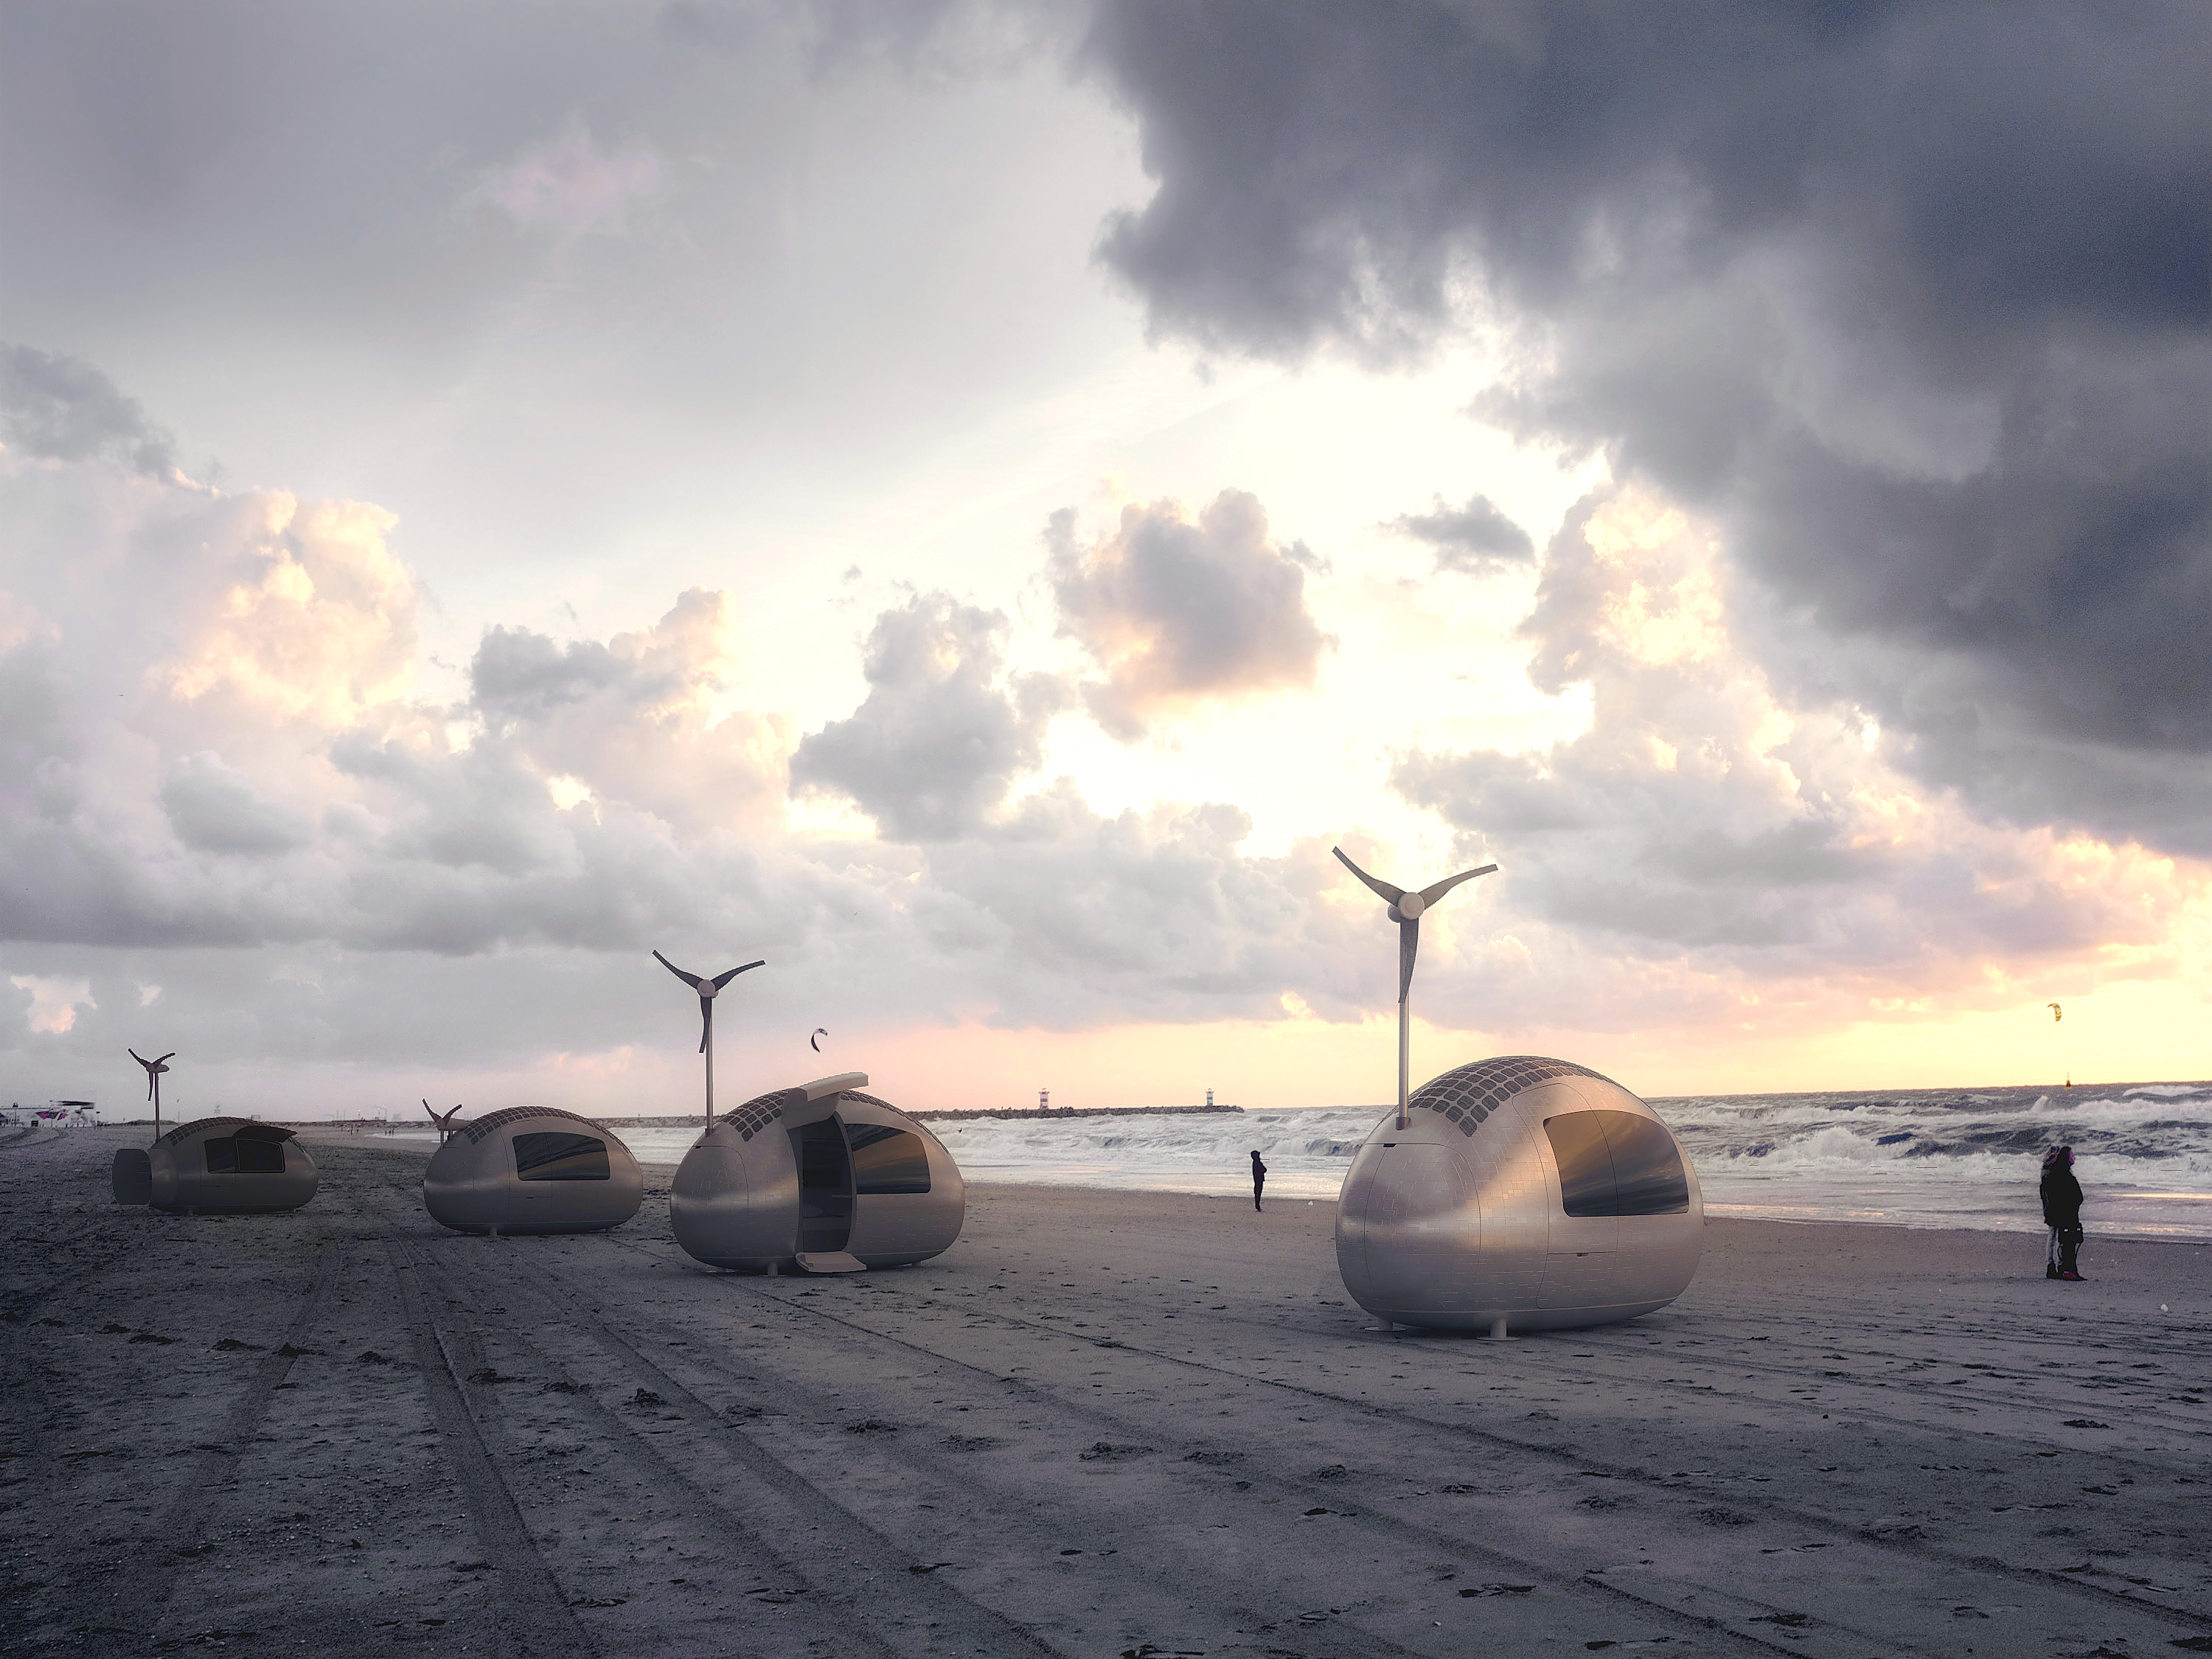 Four Ecocapsules, solar and wind powered tiny homes on wheels, are on the beach.